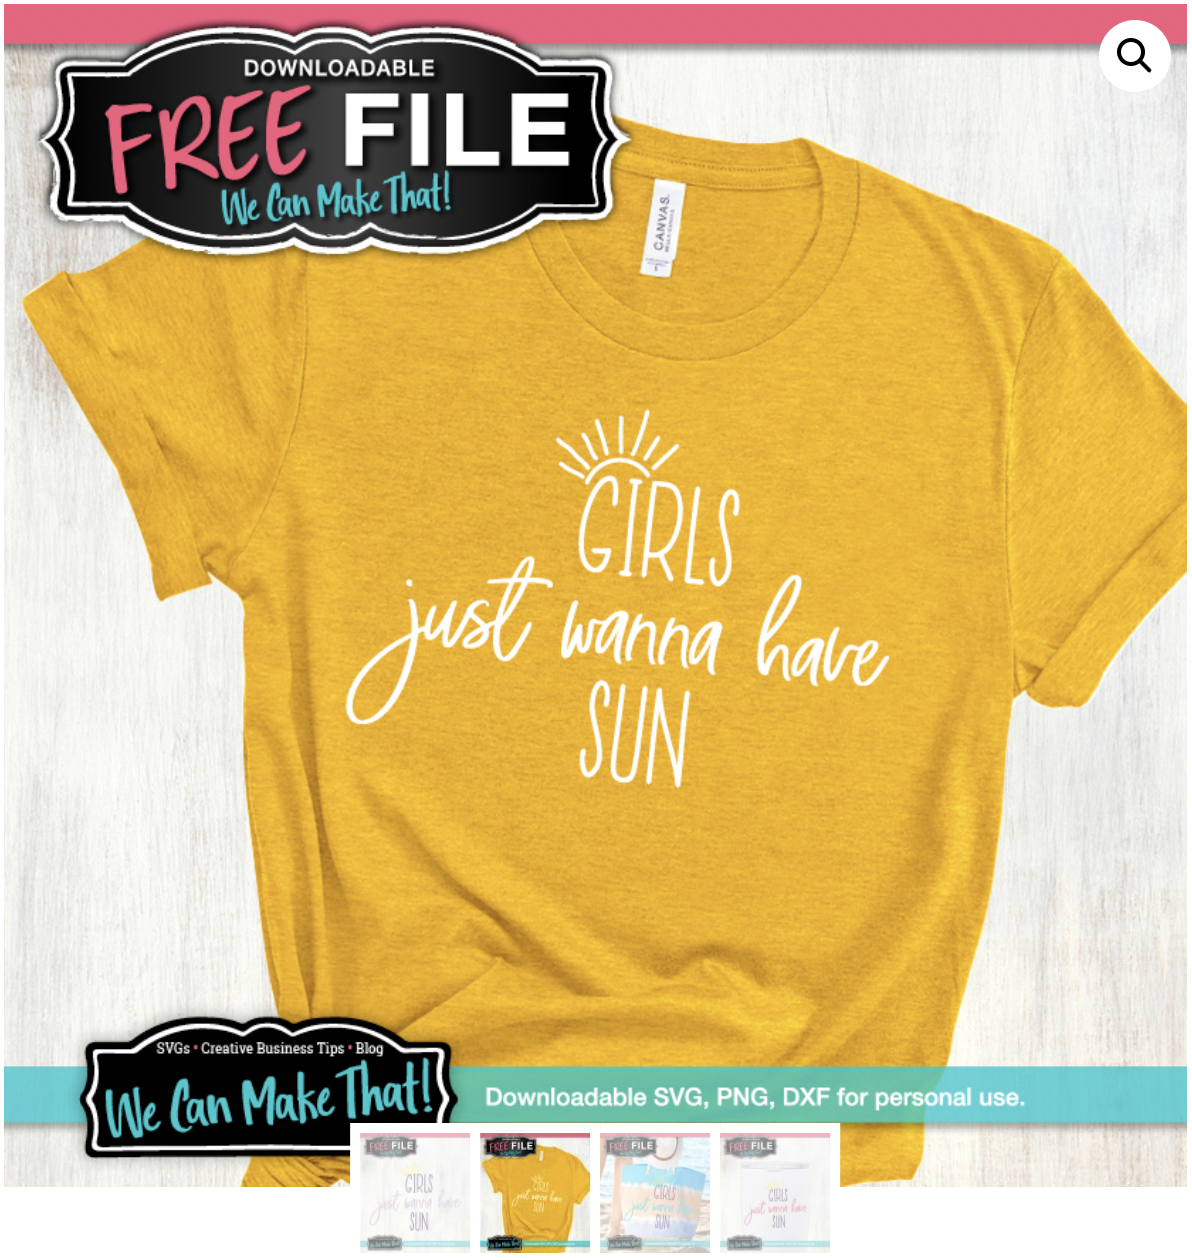 A mustard yellow t-shirt on a white and grey background. The t-shirt has white writing that says “Girls Just Wanna Have Sun.”